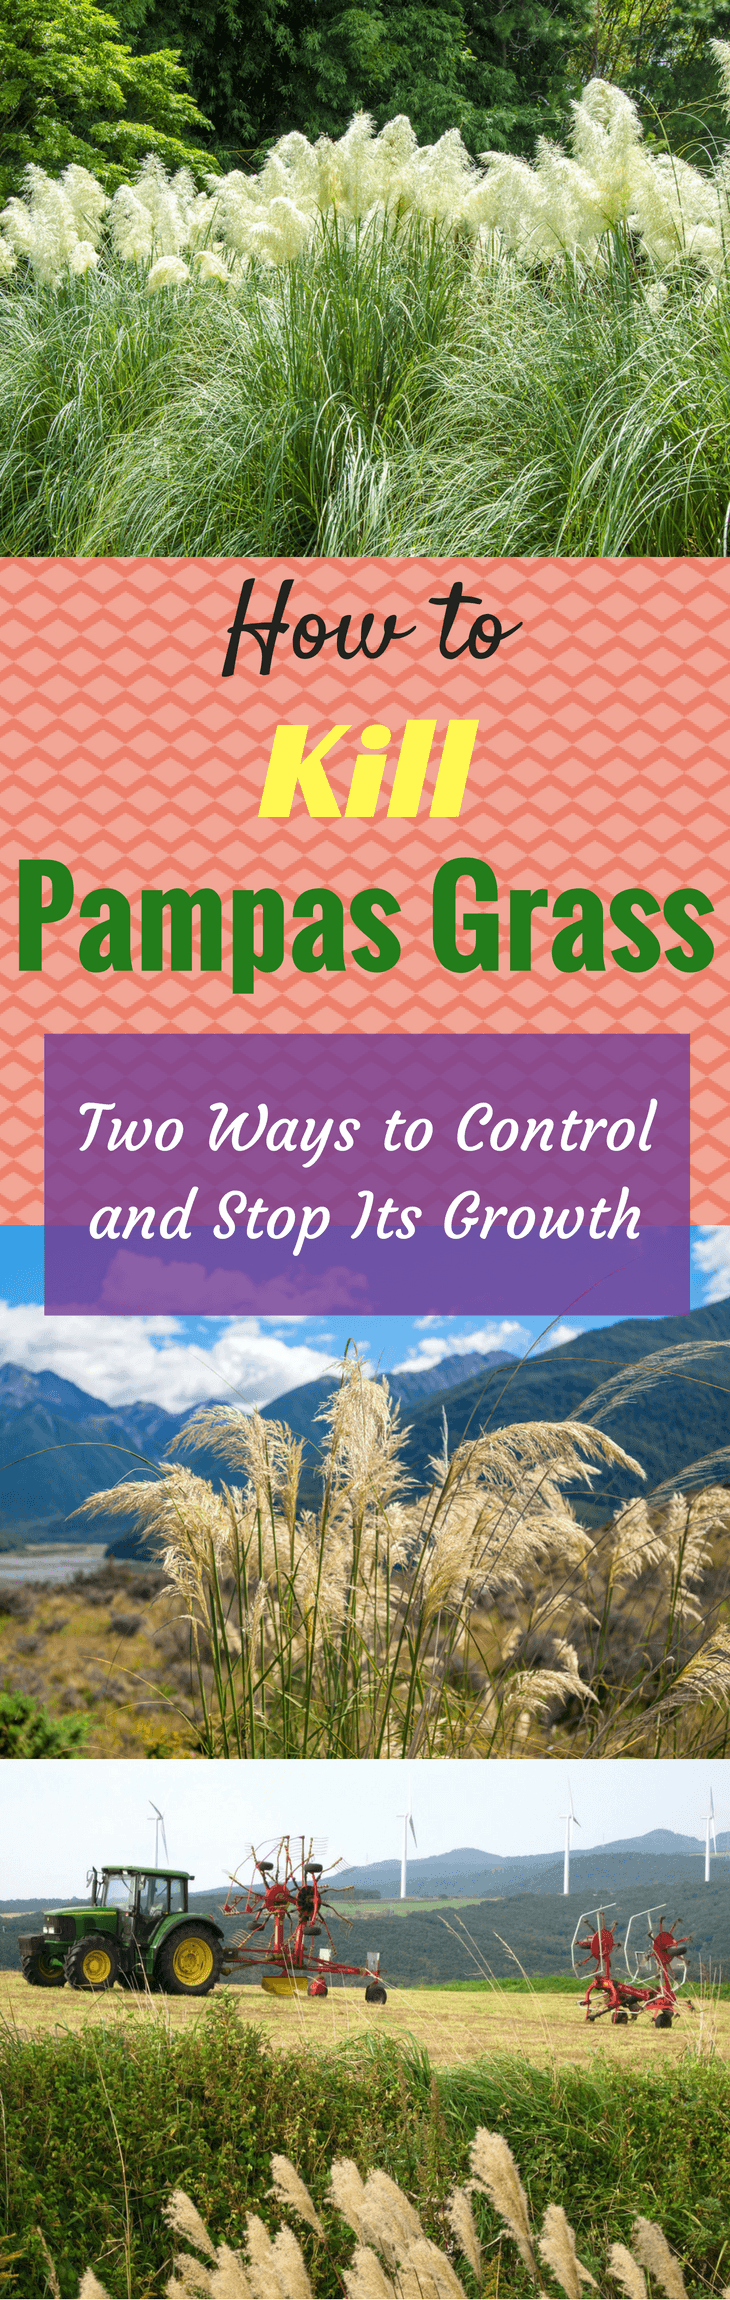 How to Kill Pampas Grass Two Ways to Control and Stop Its Growth